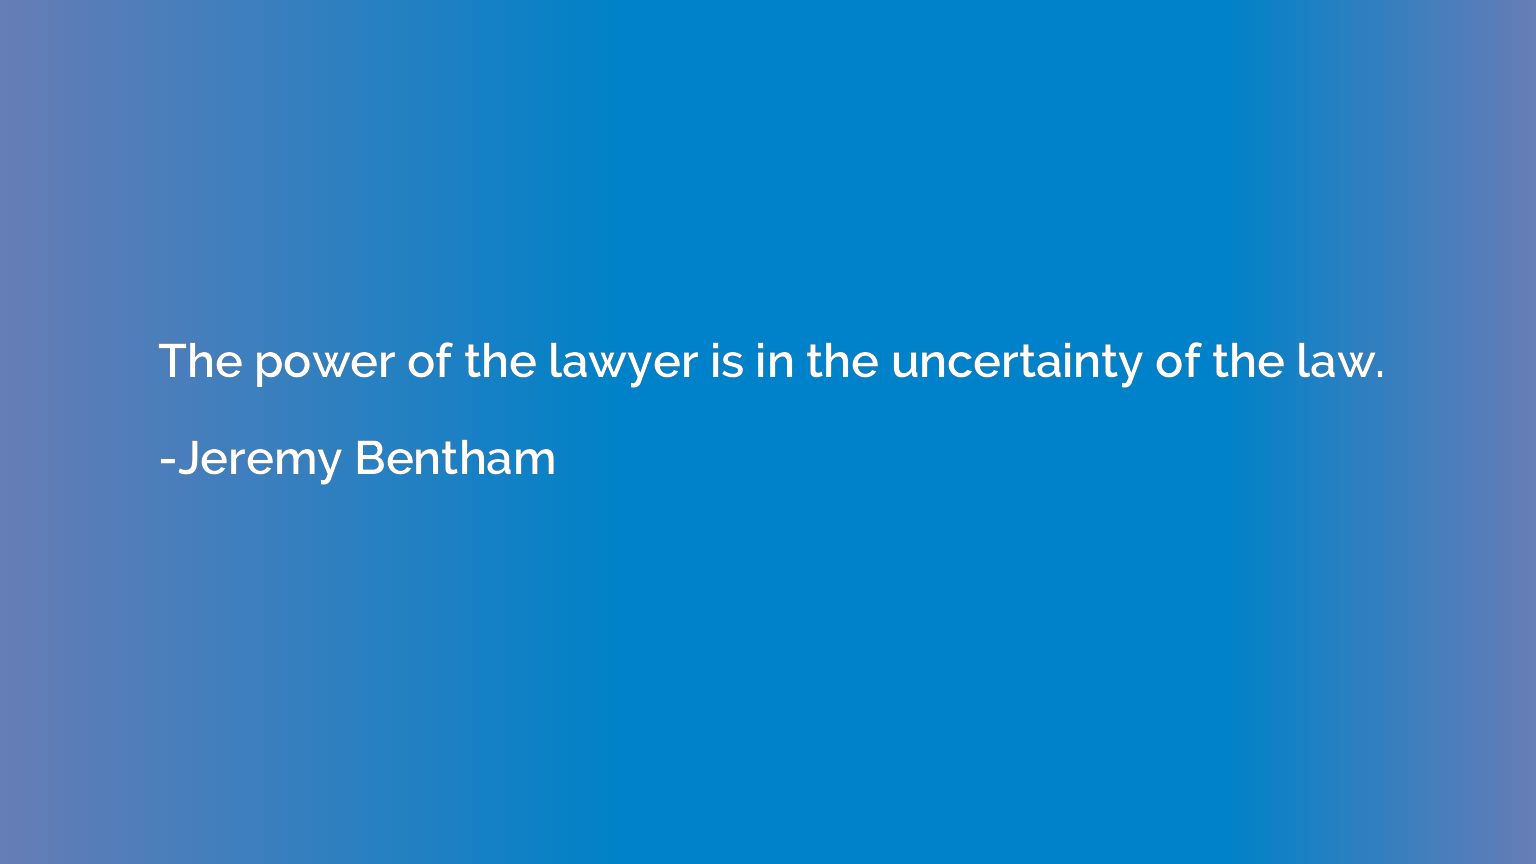 The power of the lawyer is in the uncertainty of the law.